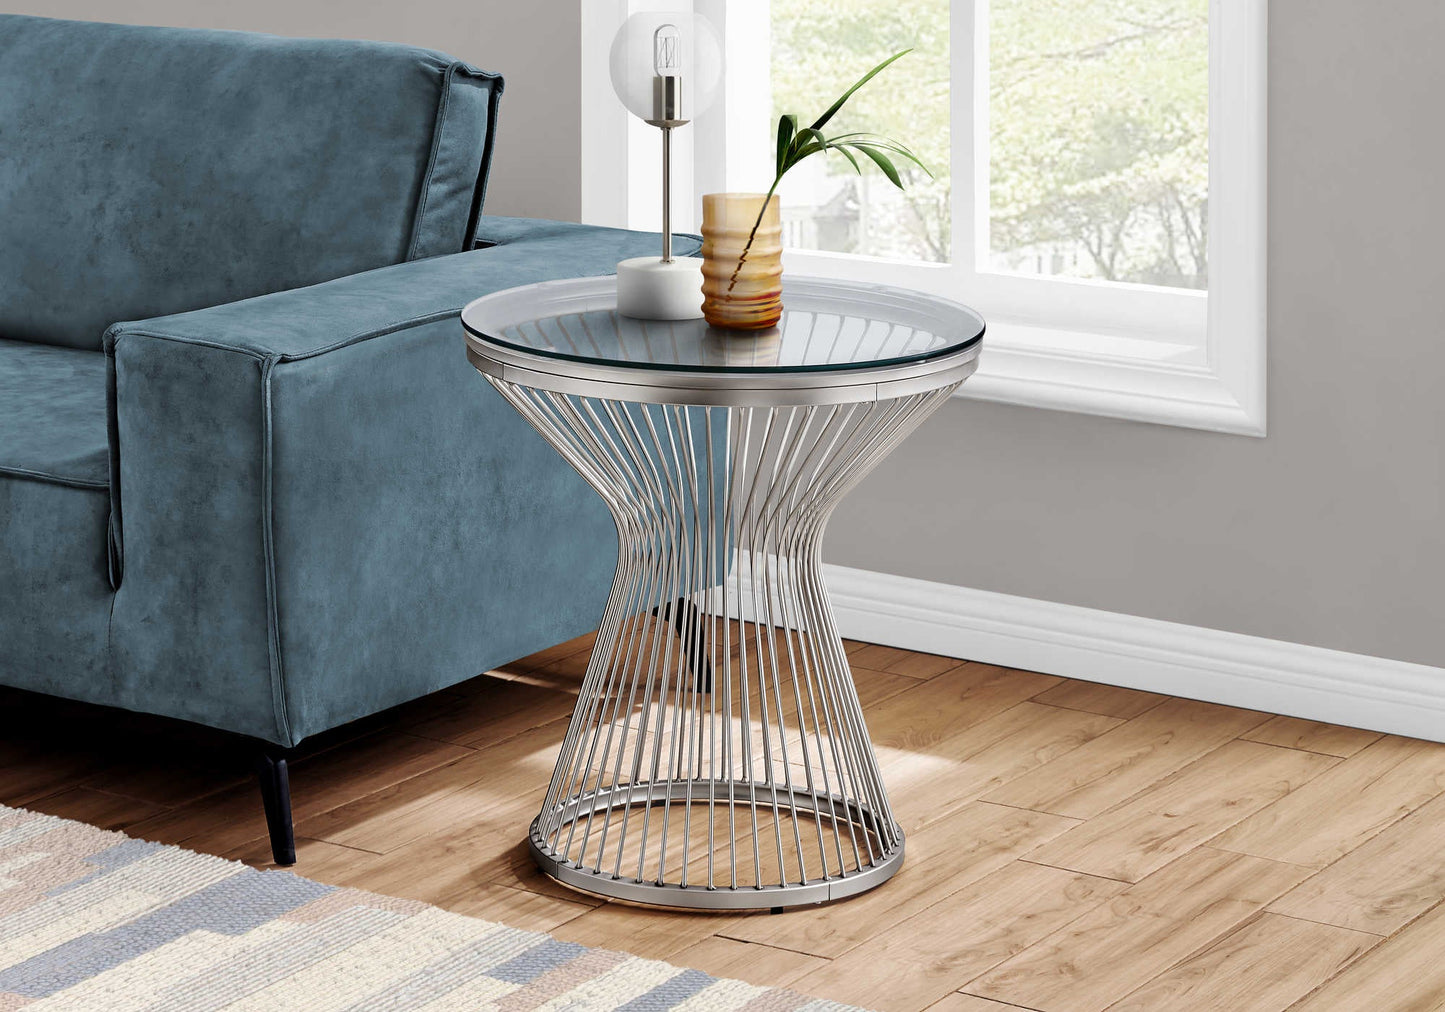 24"L/24"H Transitional Round Bedroom Accent Table with Glass Tabletop